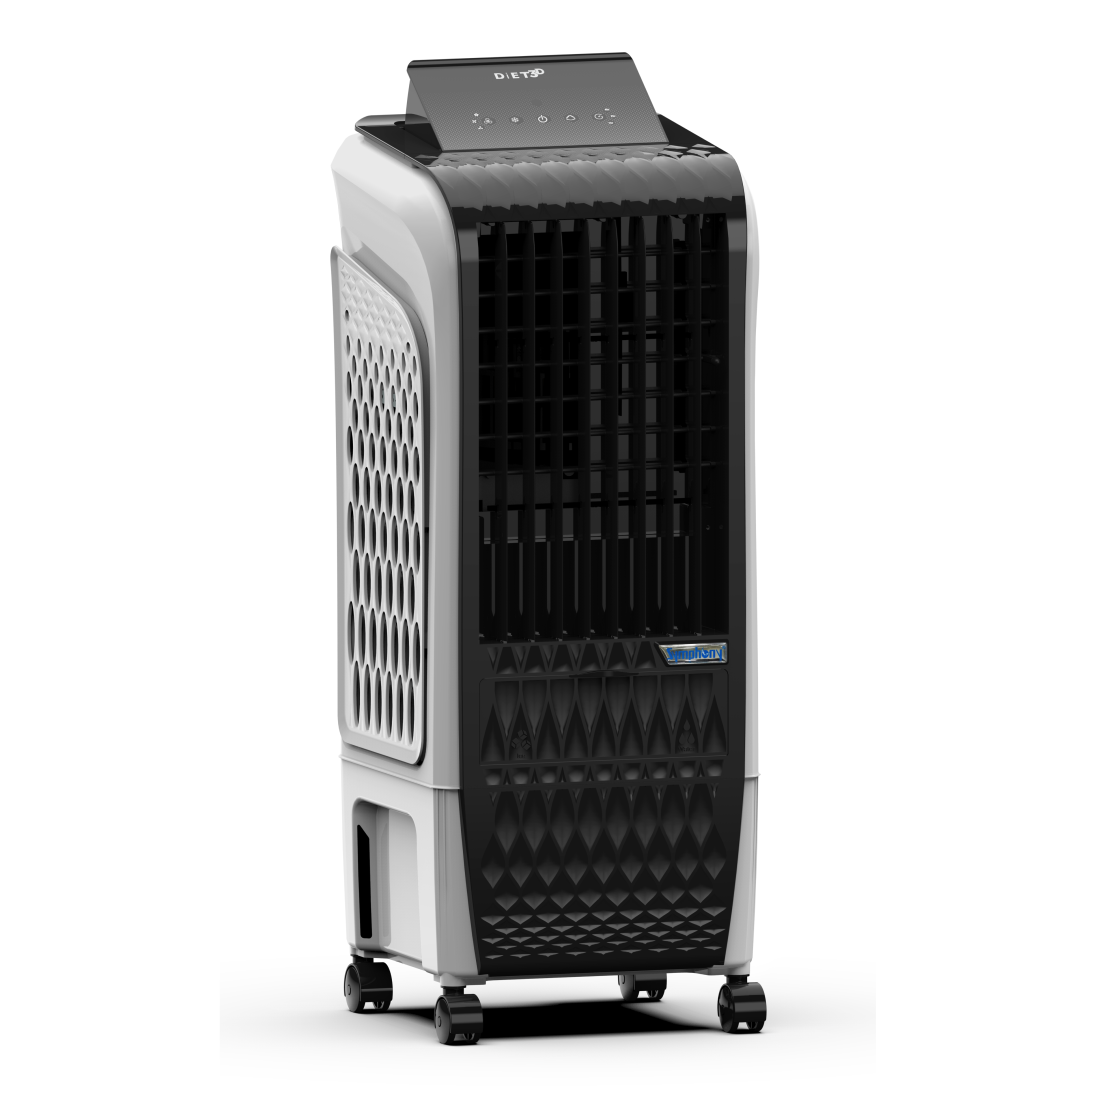 Image of a Prem-I-Air 3.5L Evaporative Air Cooler on a white background